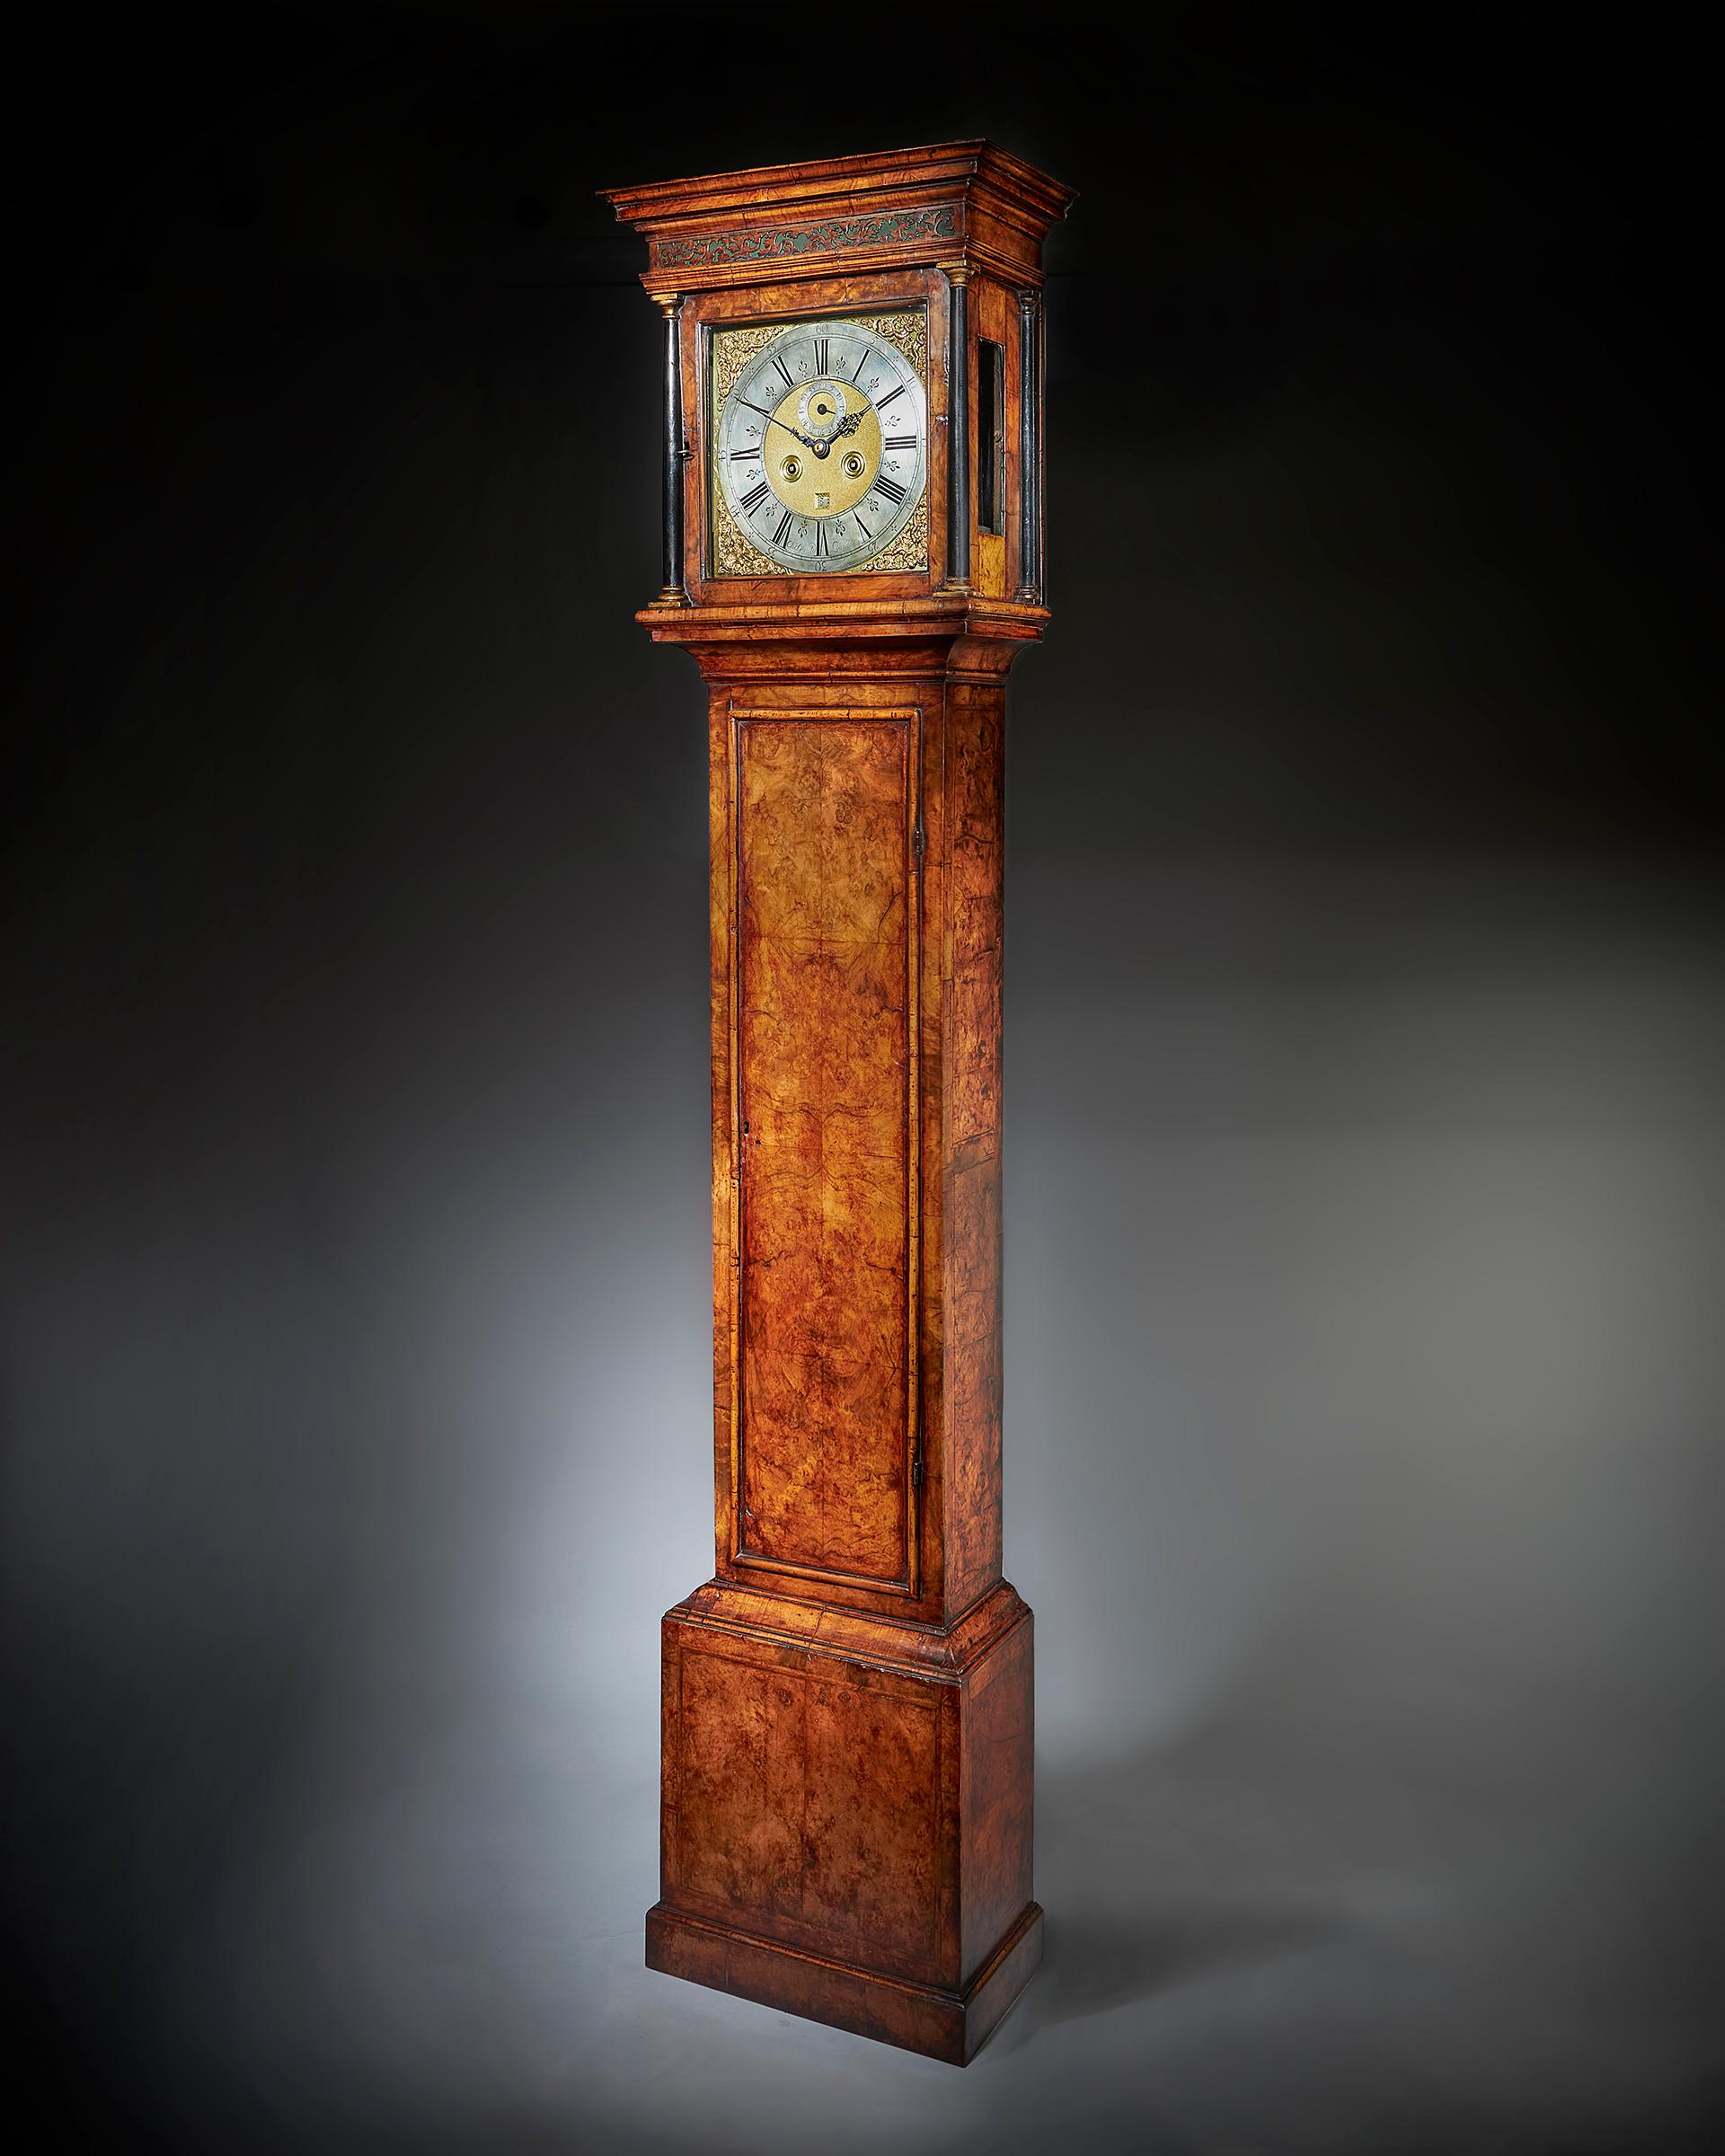 A superb early 18th century eight-day Queen Anne longcase clock by the famous maker Christopher Gould, circa 1705-1710. 

The exquisite burr walnut veneered oak case is of the highest quality, having a square hood and a trunk door framed with